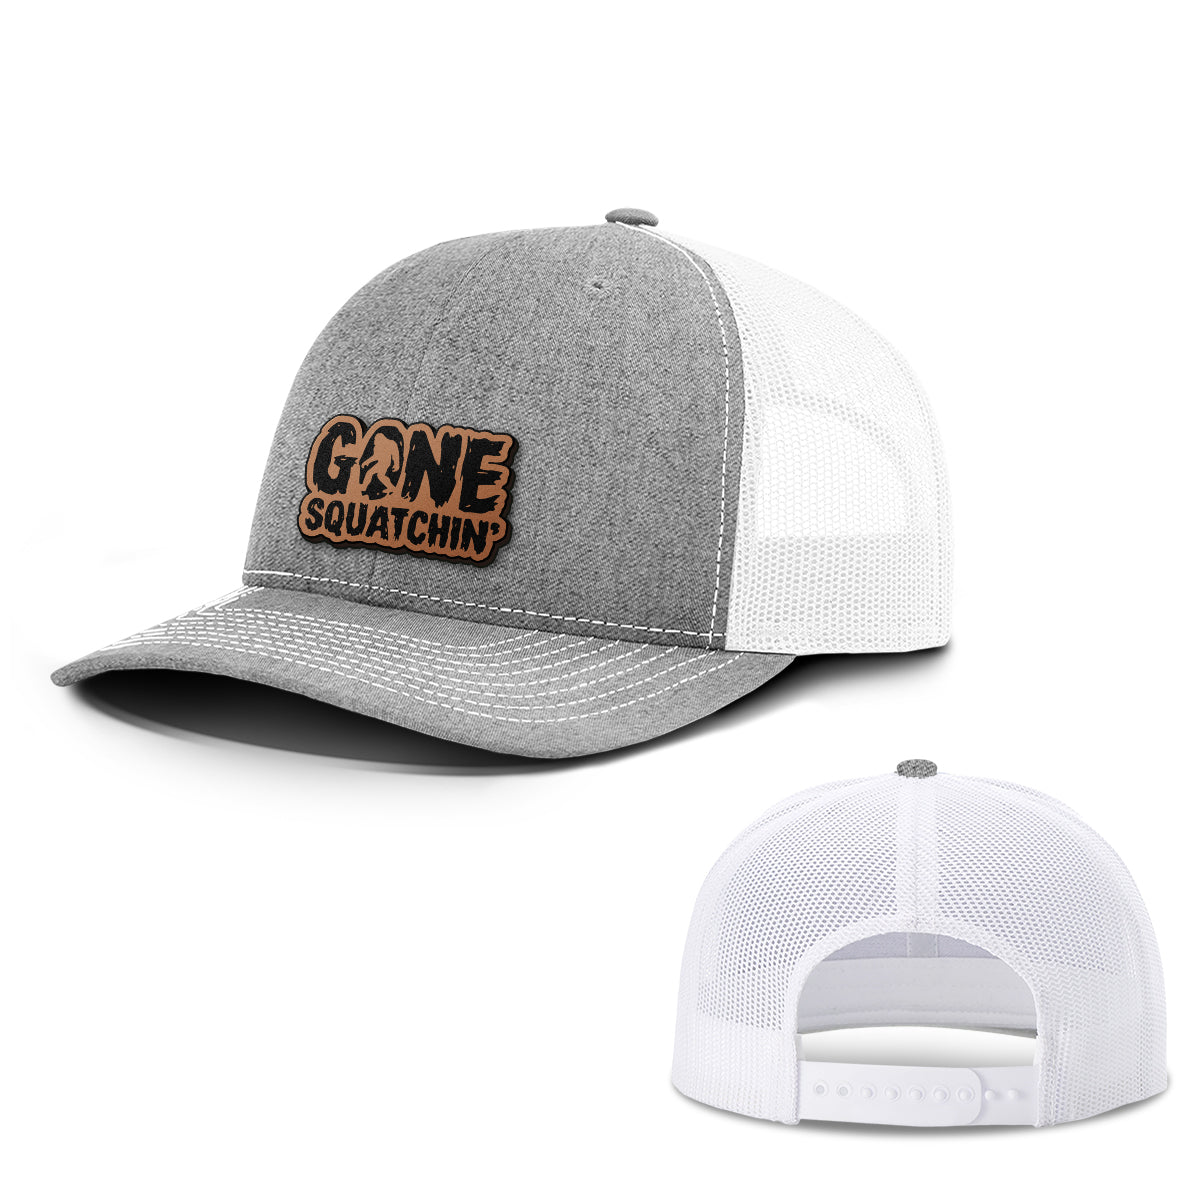 Gone Squatchin Leather Patch Hats - BustedTees.com